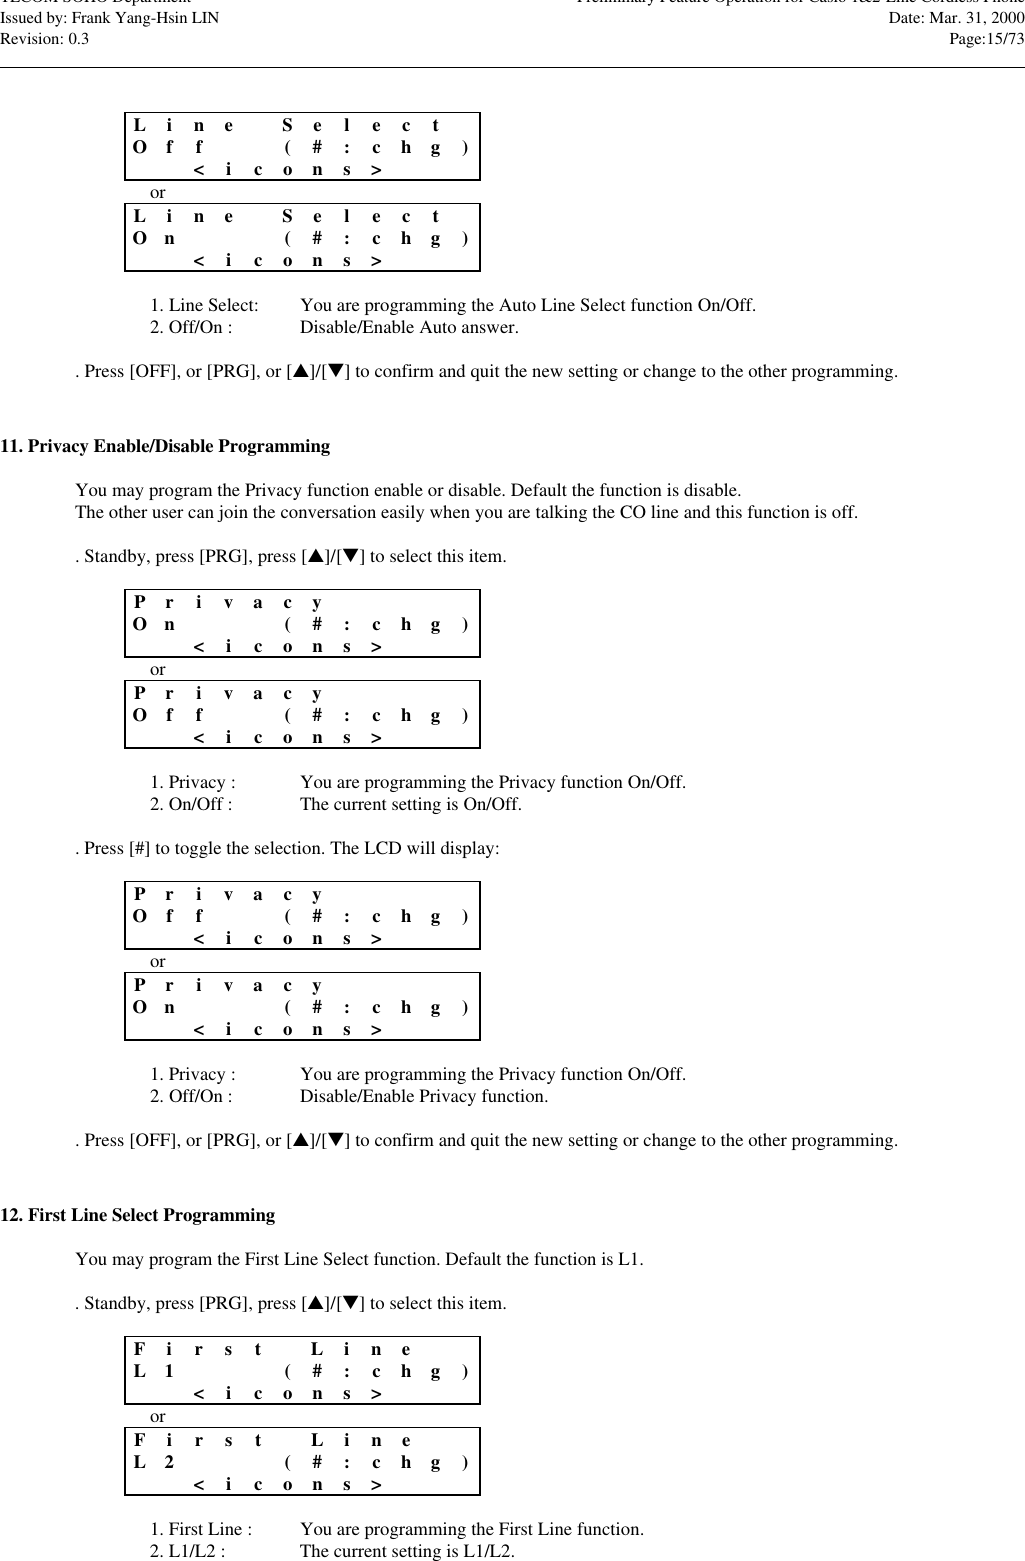 TECOM SOHO Department Preliminary Feature Operation for Casio 1&amp;2-Line Cordless PhoneIssued by: Frank Yang-Hsin LIN Date: Mar. 31, 2000Revision: 0.3 Page:15/73                                                                                                                                                                                                                                                                                                                            LineSele c tOf f ( #:chg)&lt;icons&gt;orLineSele c tOn(#:chg)&lt;icons&gt;1. Line Select: You are programming the Auto Line Select function On/Off.2. Off/On : Disable/Enable Auto answer.. Press [OFF], or [PRG], or [s]/[t] to confirm and quit the new setting or change to the other programming.11. Privacy Enable/Disable ProgrammingYou may program the Privacy function enable or disable. Default the function is disable.The other user can join the conversation easily when you are talking the CO line and this function is off.. Standby, press [PRG], press [s]/[t] to select this item.Priv a cyOn(#:chg)&lt;icons&gt;orPriv a cyOf f ( #:chg)&lt;icons&gt;1. Privacy : You are programming the Privacy function On/Off.2. On/Off : The current setting is On/Off.. Press [#] to toggle the selection. The LCD will display:Priv a cyOf f ( #:chg)&lt;icons&gt;orPriv a cyOn(#:chg)&lt;icons&gt;1. Privacy : You are programming the Privacy function On/Off.2. Off/On : Disable/Enable Privacy function.. Press [OFF], or [PRG], or [s]/[t] to confirm and quit the new setting or change to the other programming.12. First Line Select ProgrammingYou may program the First Line Select function. Default the function is L1.. Standby, press [PRG], press [s]/[t] to select this item.FirstLineL1(#:chg)&lt;icons&gt;orFirstLineL2(#:chg)&lt;icons&gt;1. First Line : You are programming the First Line function.2. L1/L2 : The current setting is L1/L2.